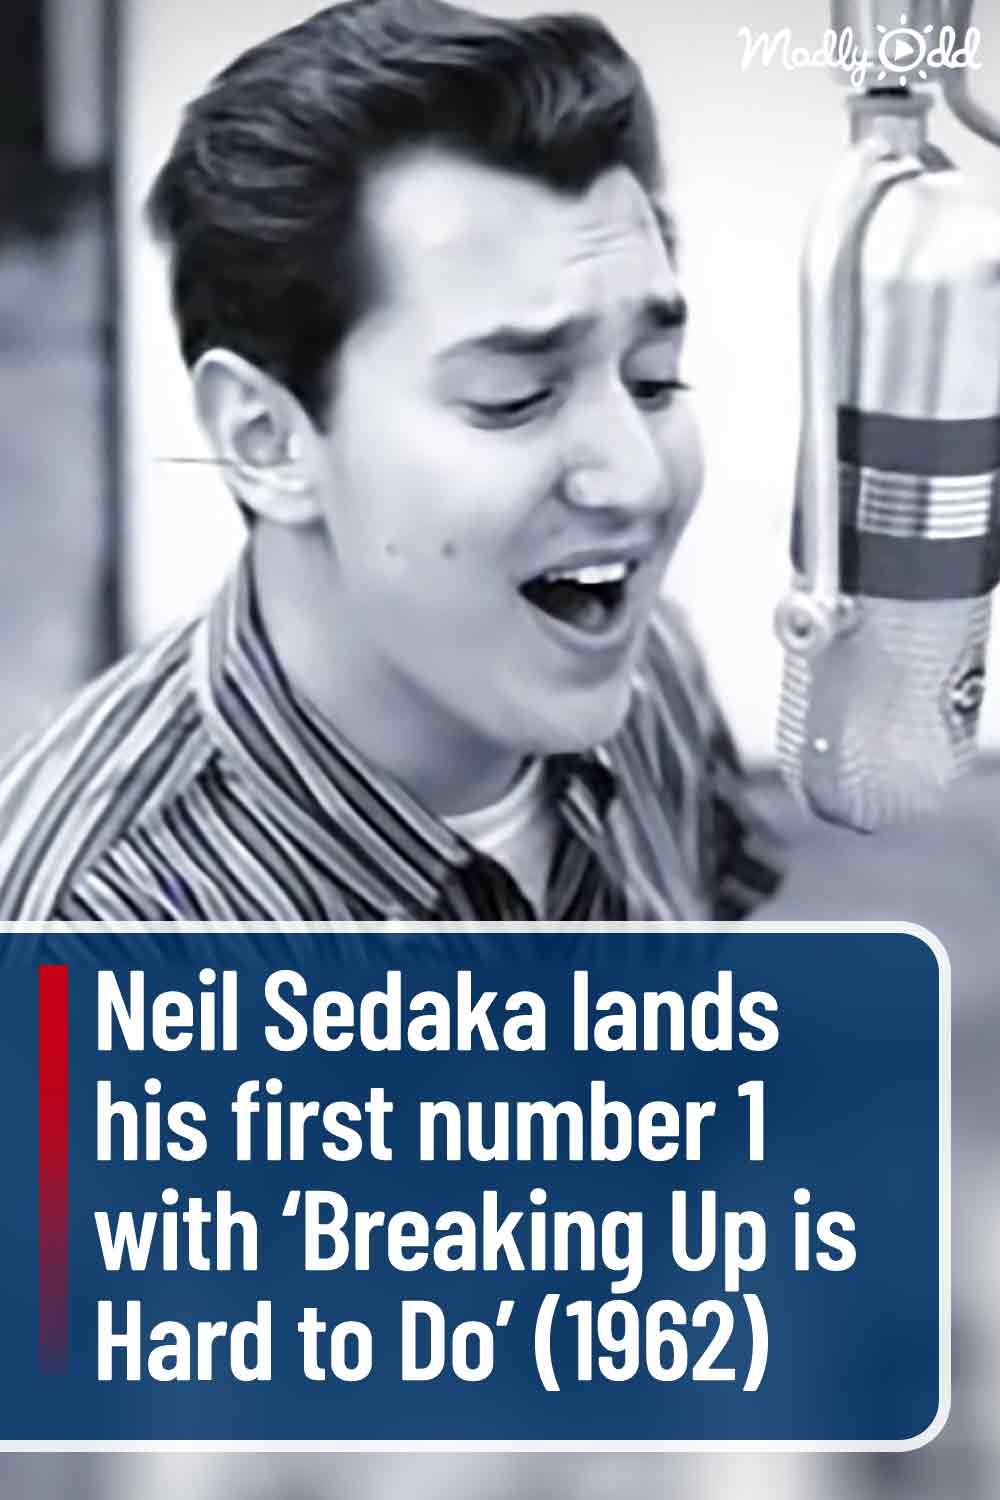 Neil Sedaka lands his first number 1 with ‘Breaking Up is Hard to Do’ (1962)